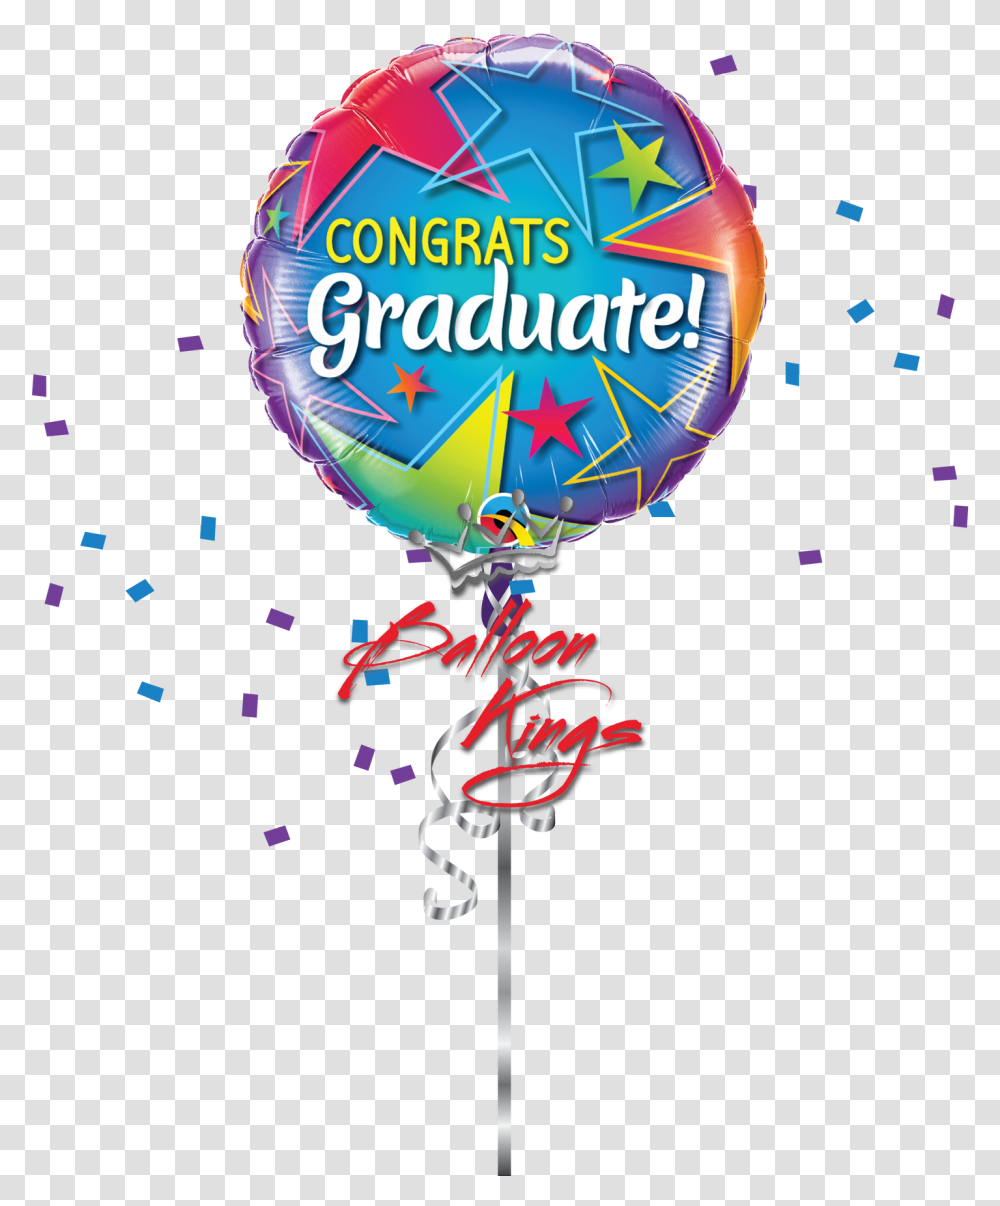 Congrats Graduate Stars Balloon I Love You, Astronomy, Outer Space, Universe, Planet Transparent Png